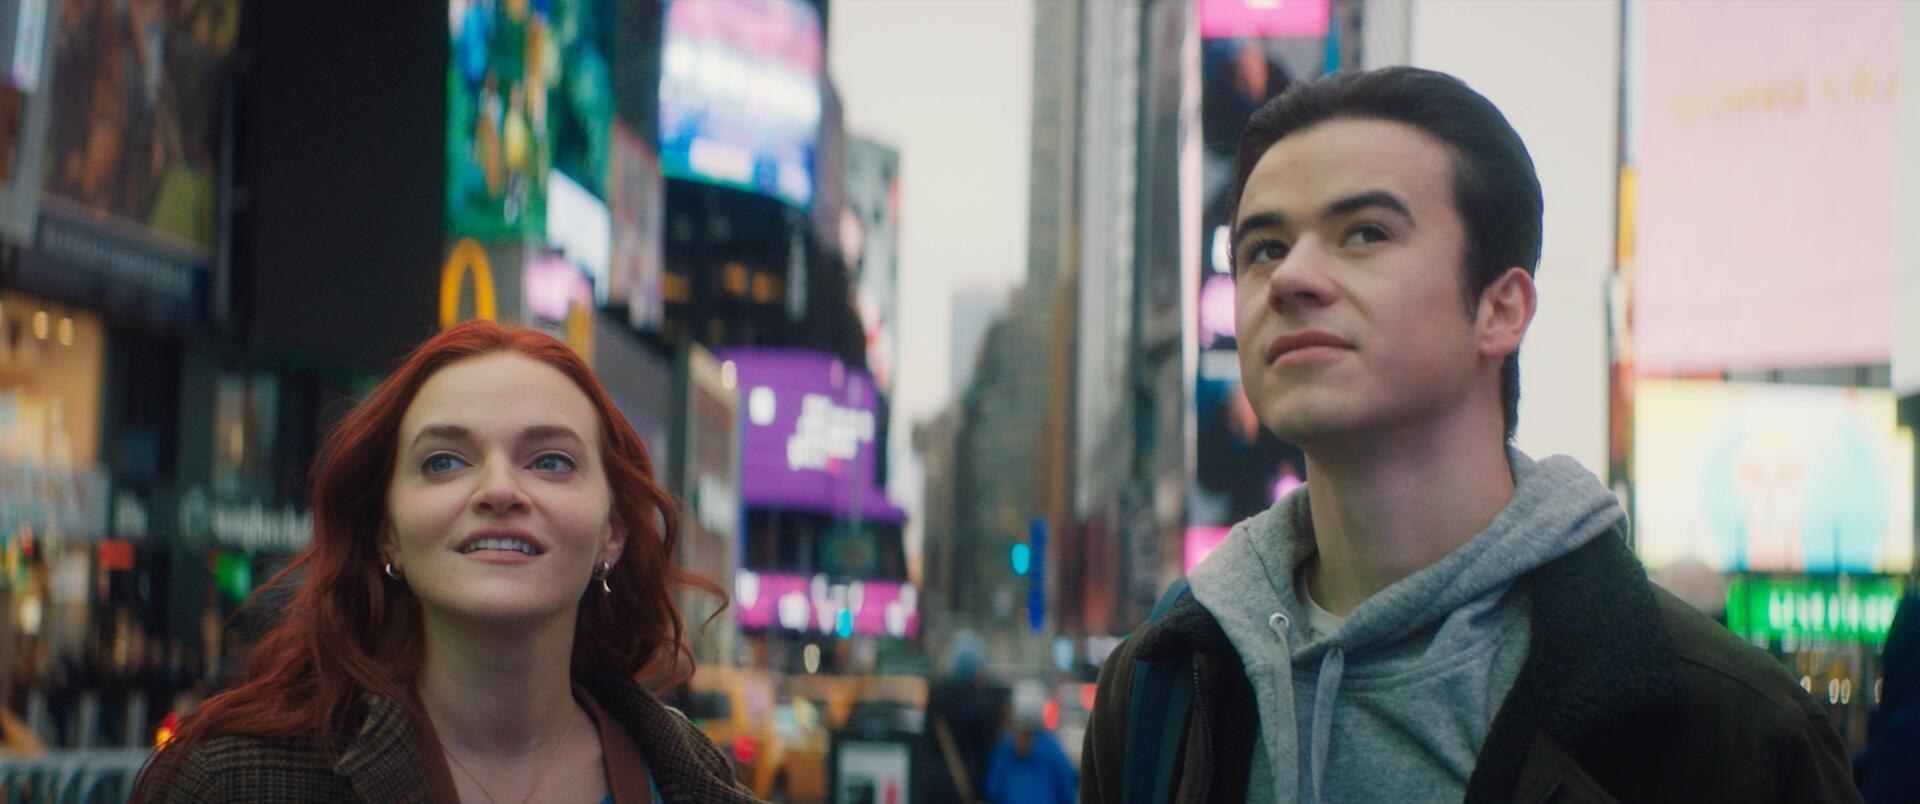 Michael and Wendy looking up at all the bright lights in Times Square.